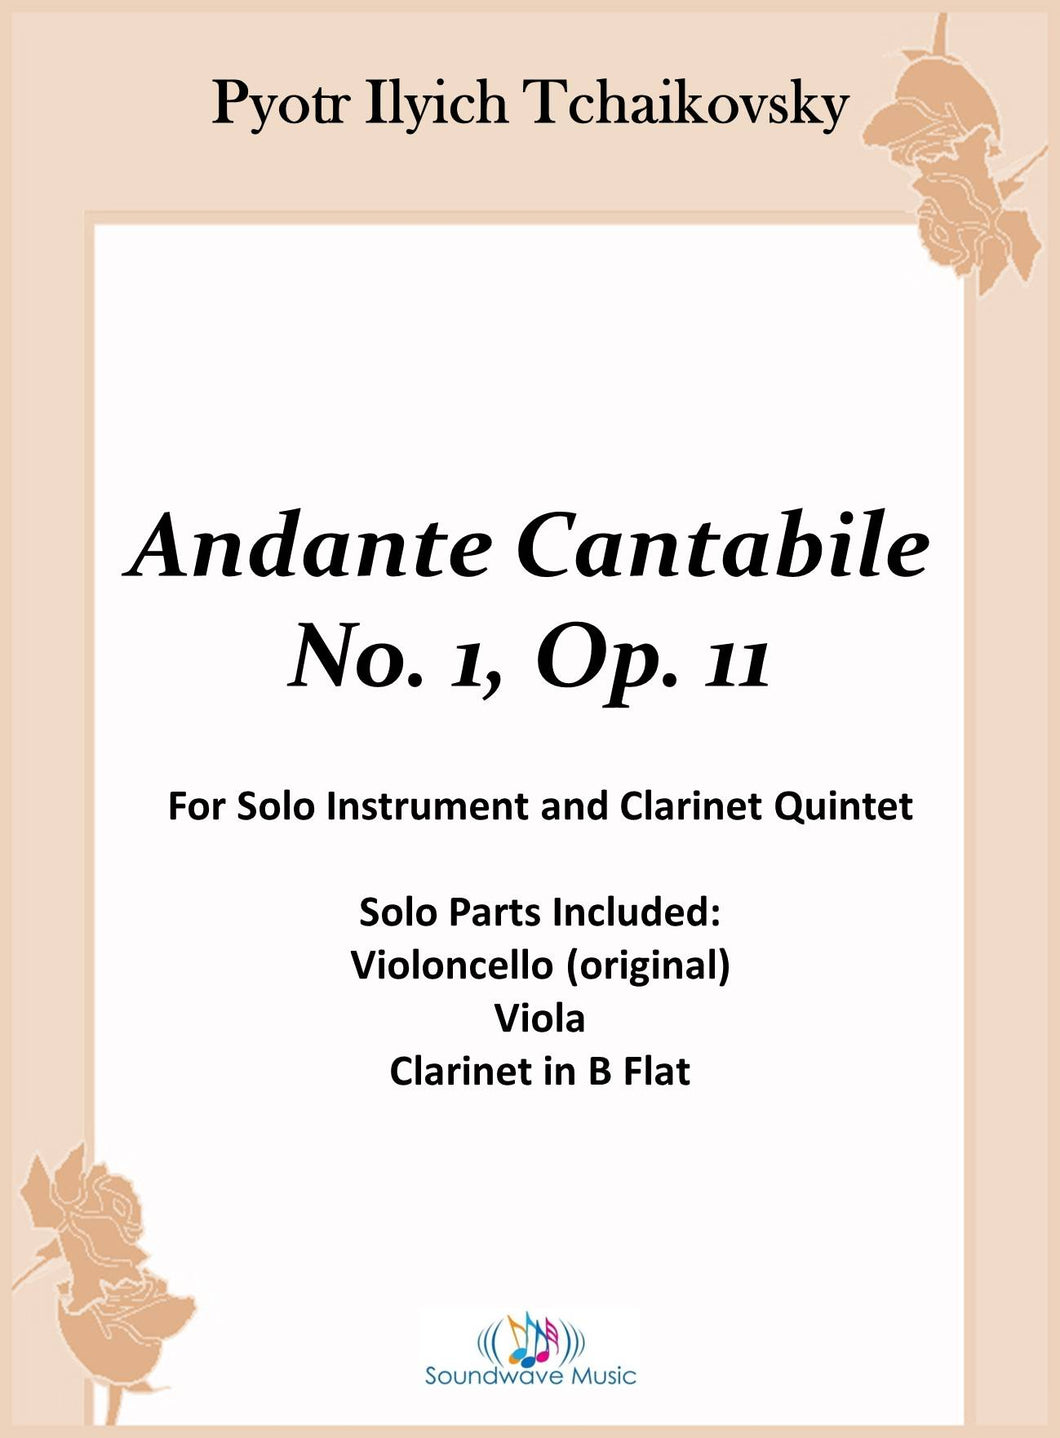 Andante Cantabile by Tchaikovsky